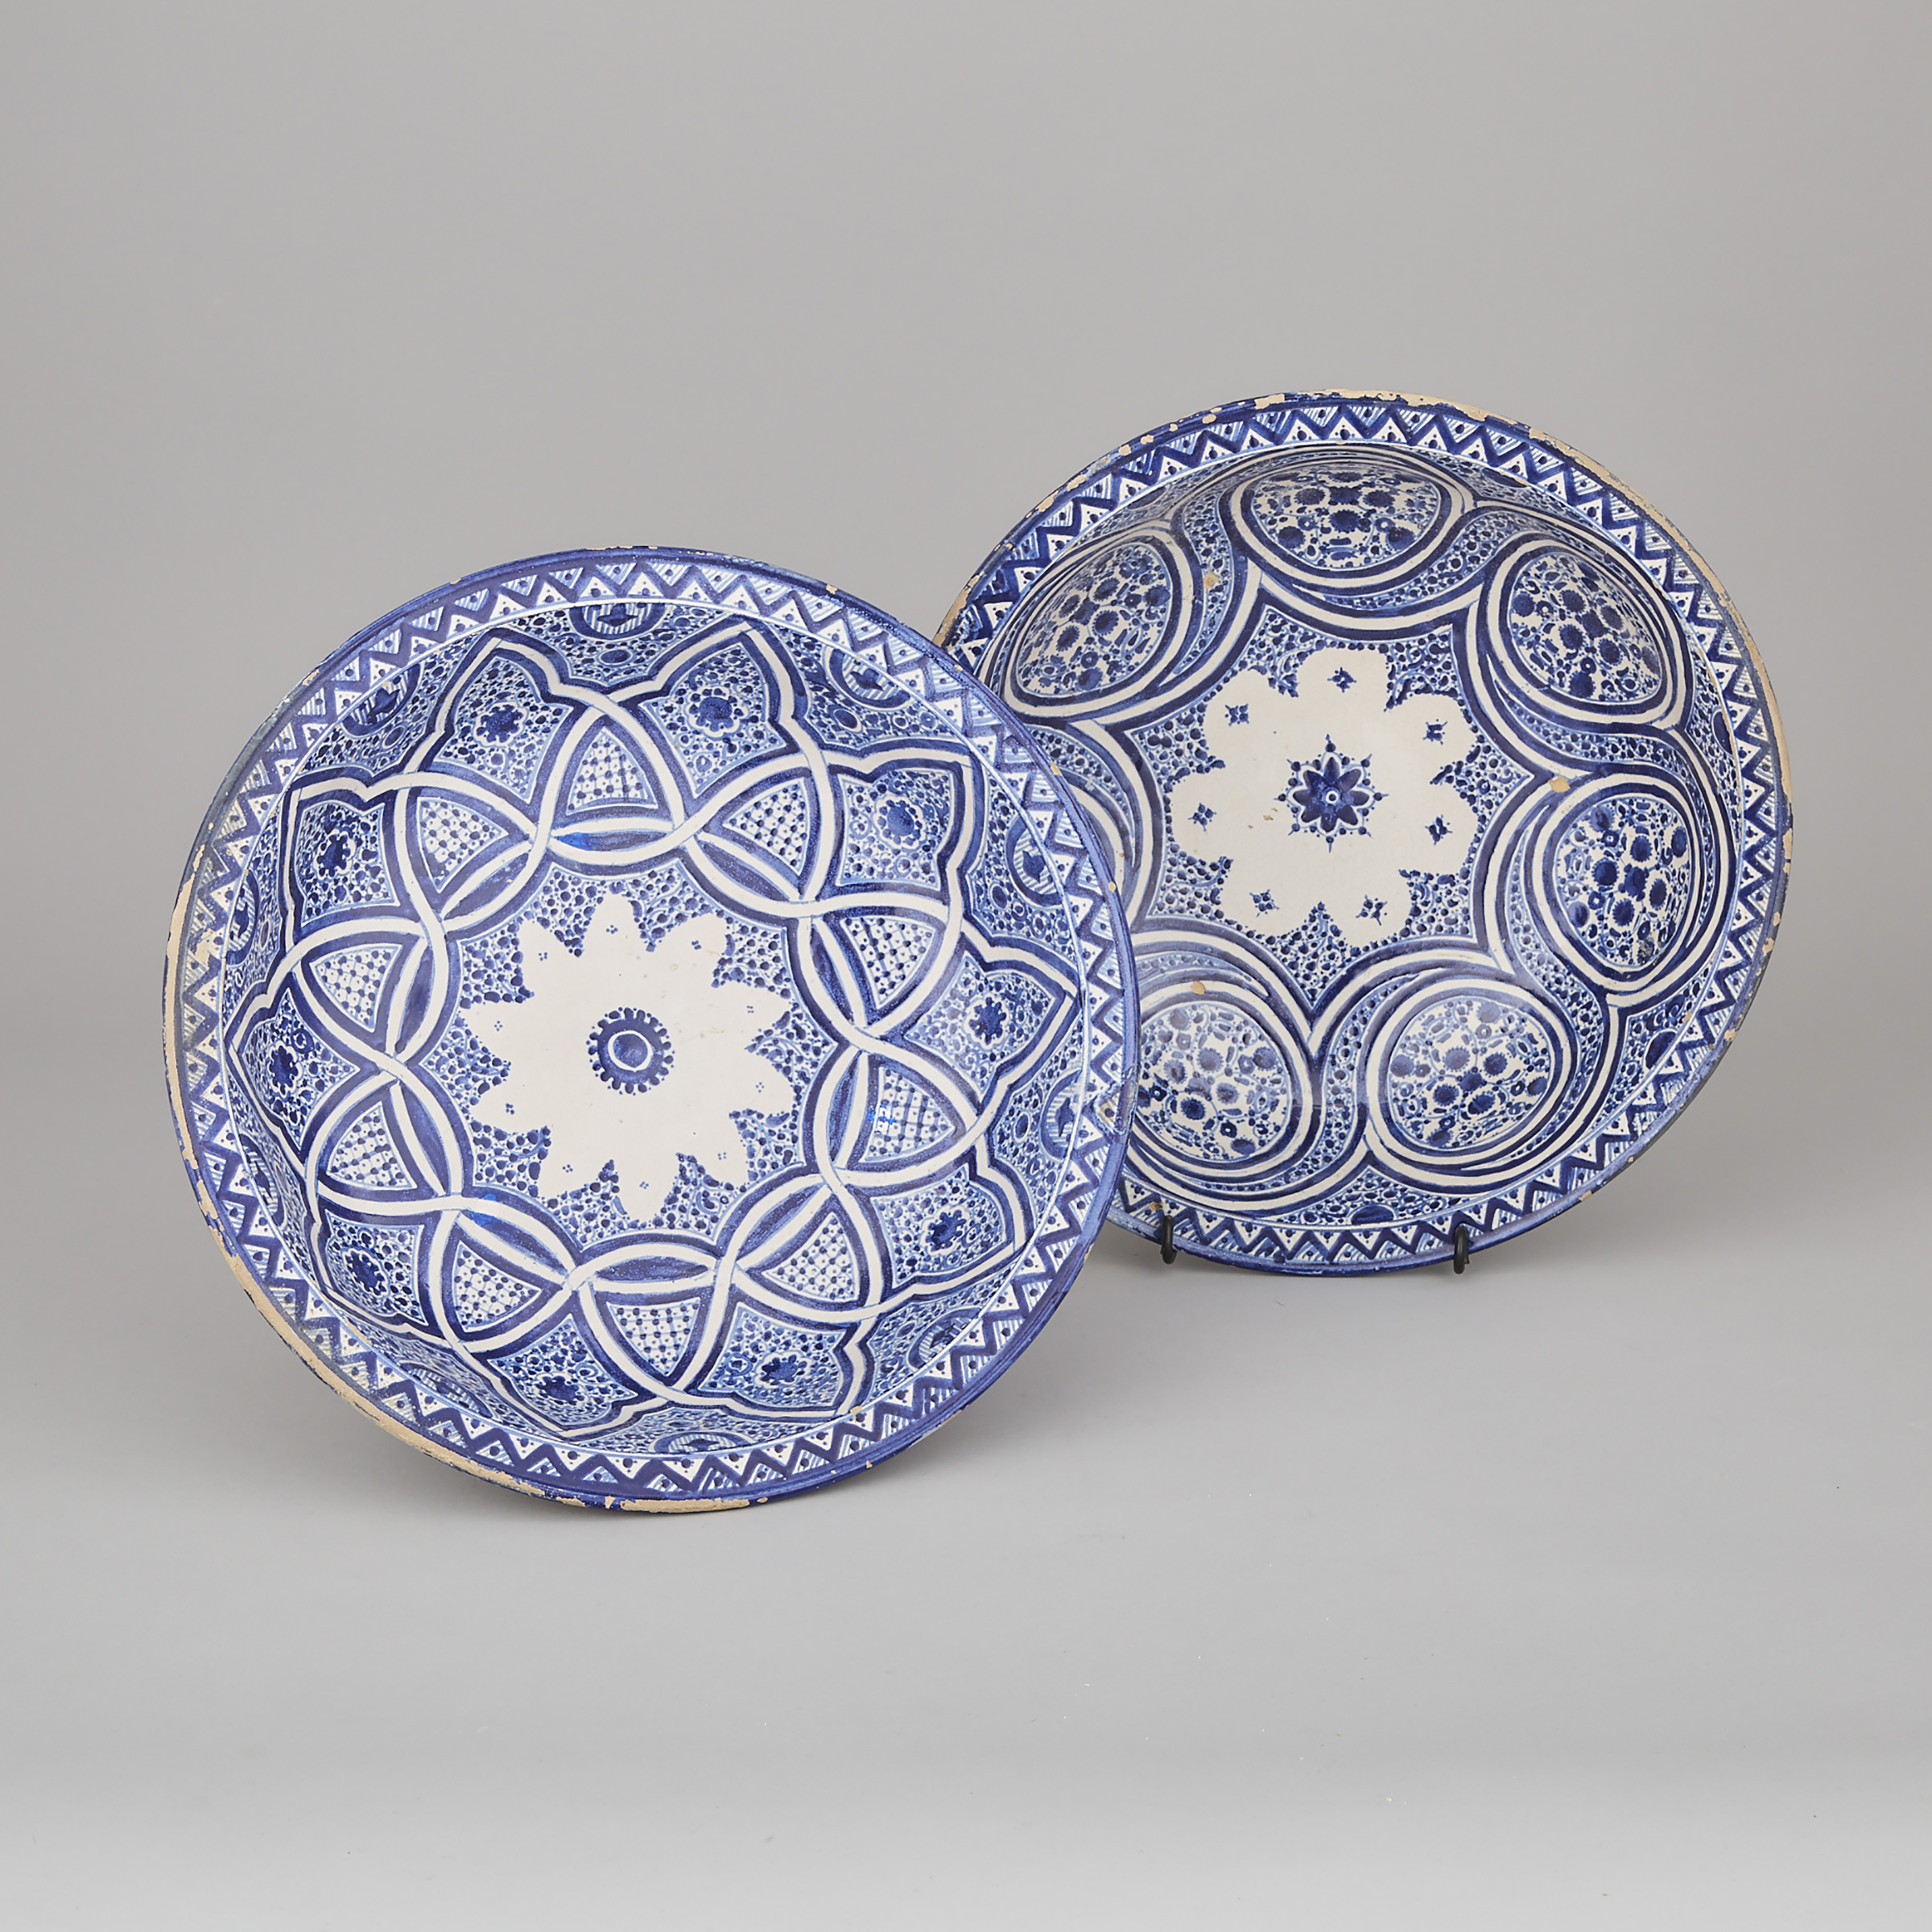 Two Hispano-Moresque Blue and White Pottery Large Bowls, 19th century